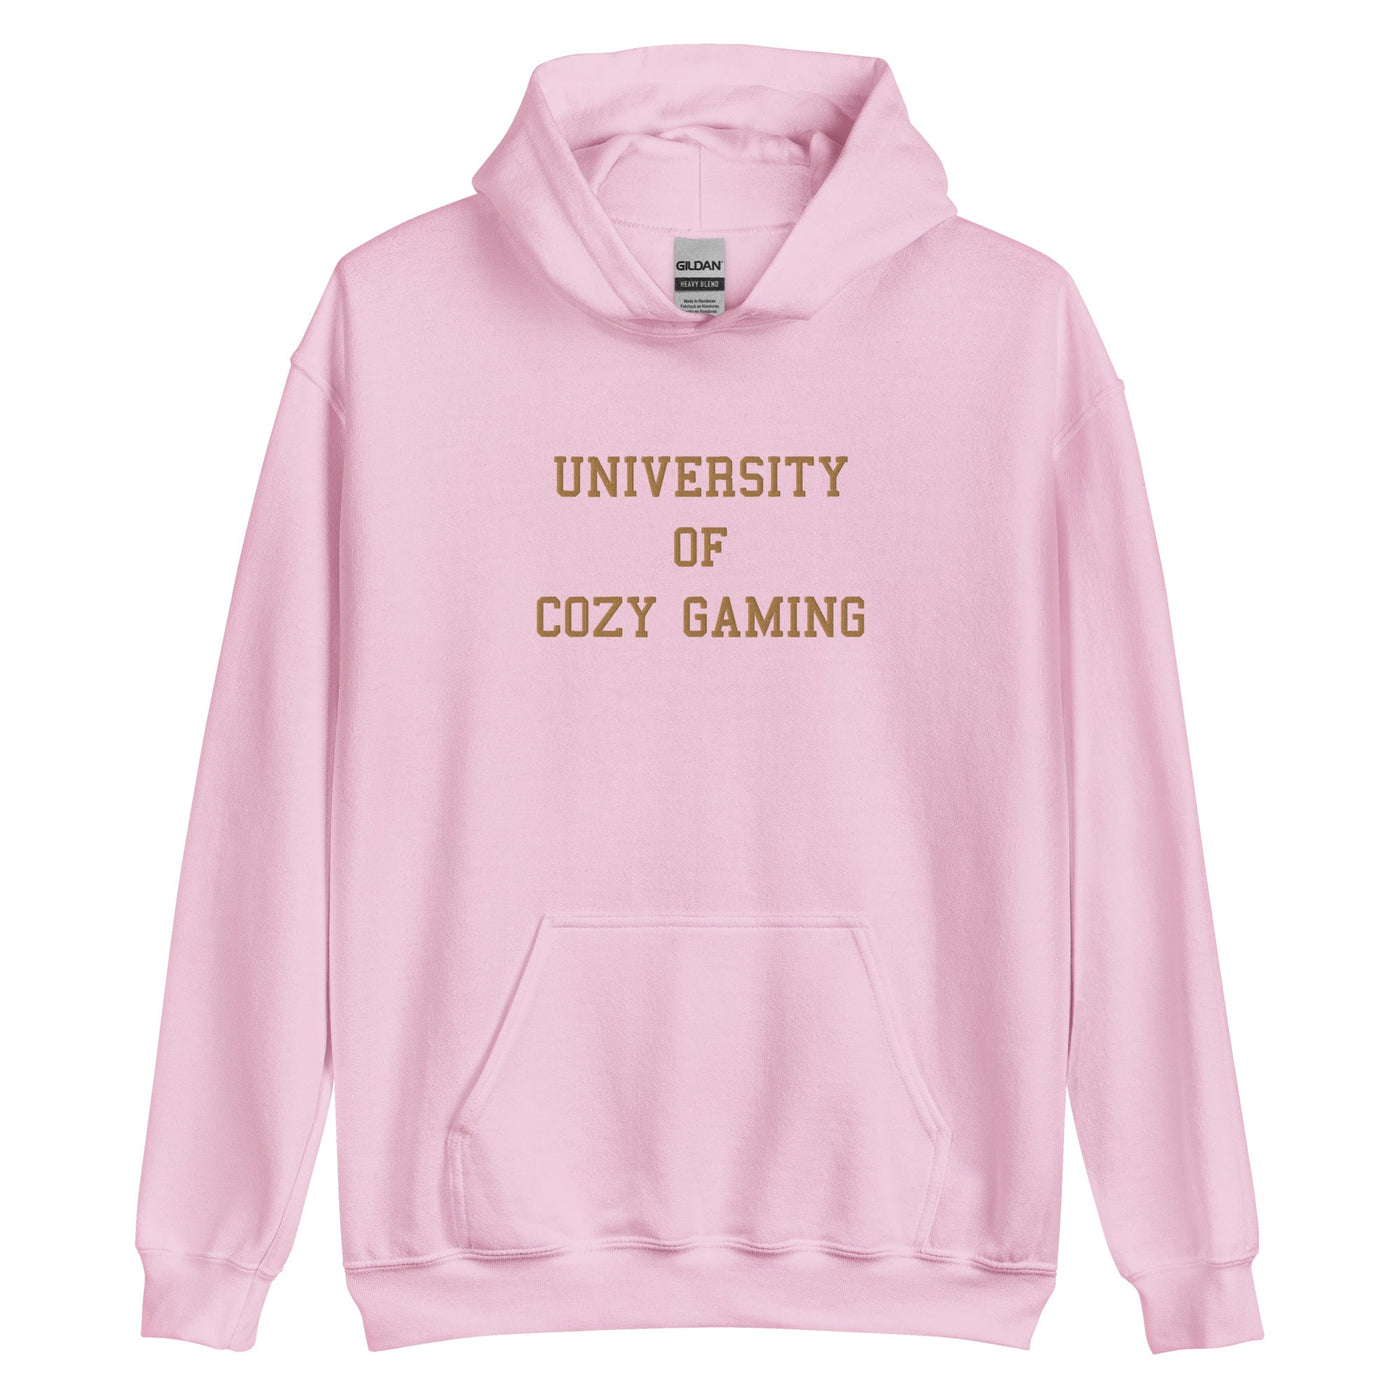 University of Cozy Gaming | Embroidered Unisex Hoodie | Cozy Gamer Threads and Thistles Inventory Light Pink S 